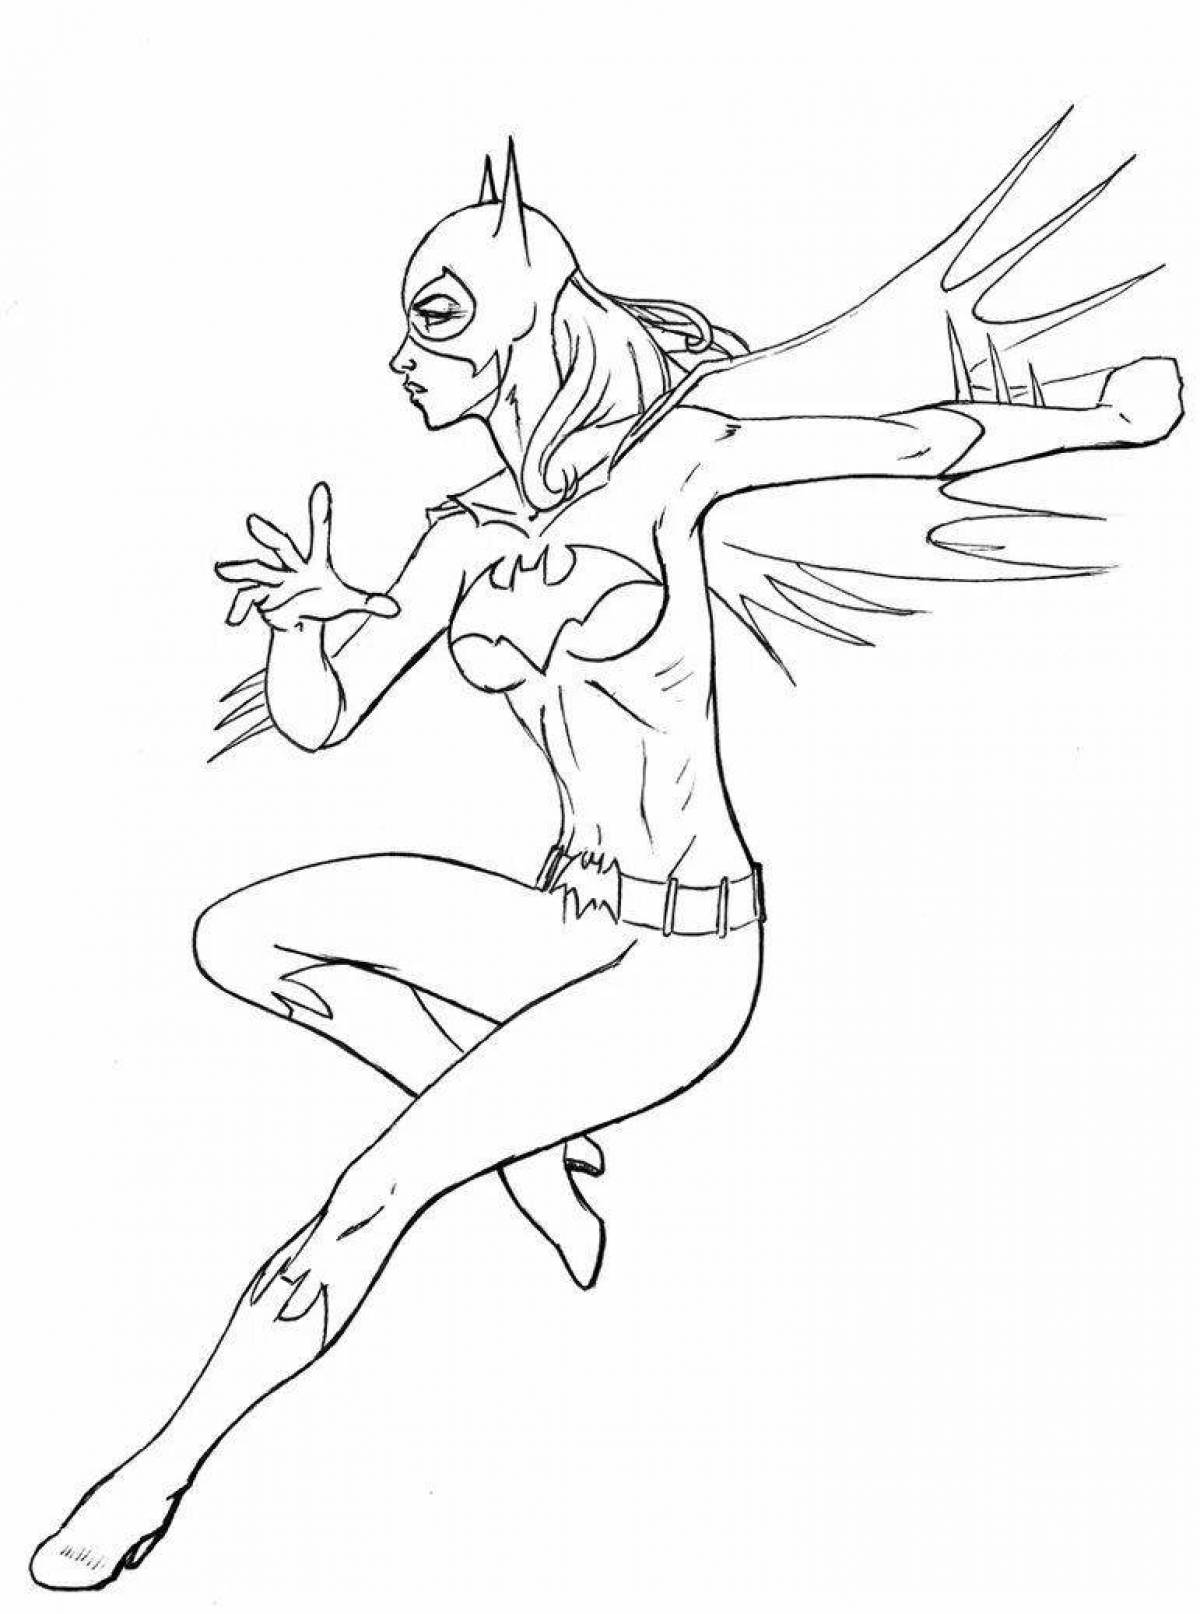 Bright coloring pages batman and catwoman